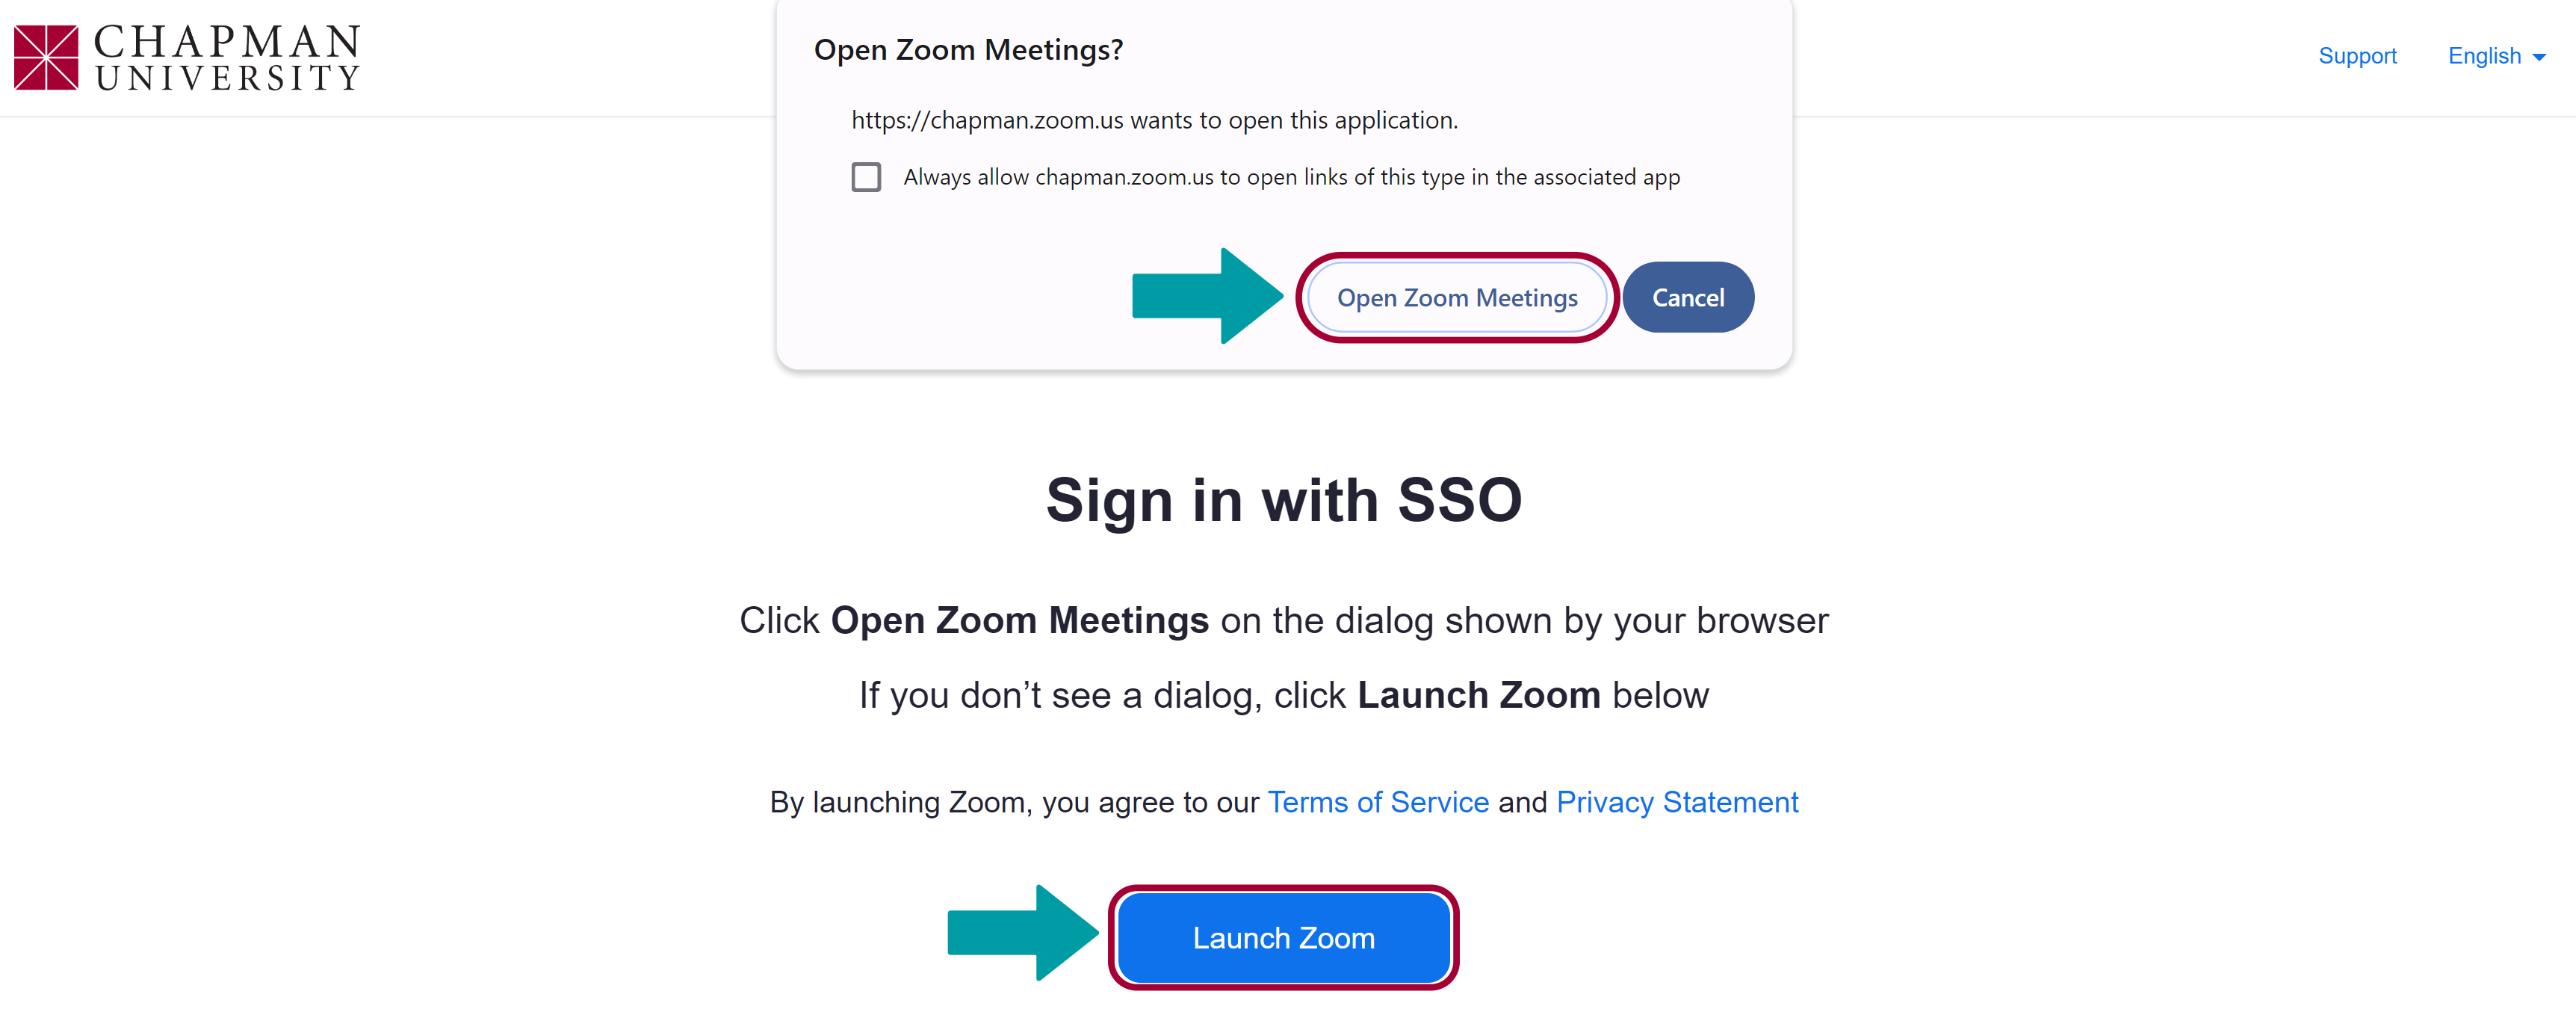 red boxes highlighting both Zoom sign-in options "Open Zoom Meetings" and "Launch Zoom." Green arrows also point to both options for more clarity.